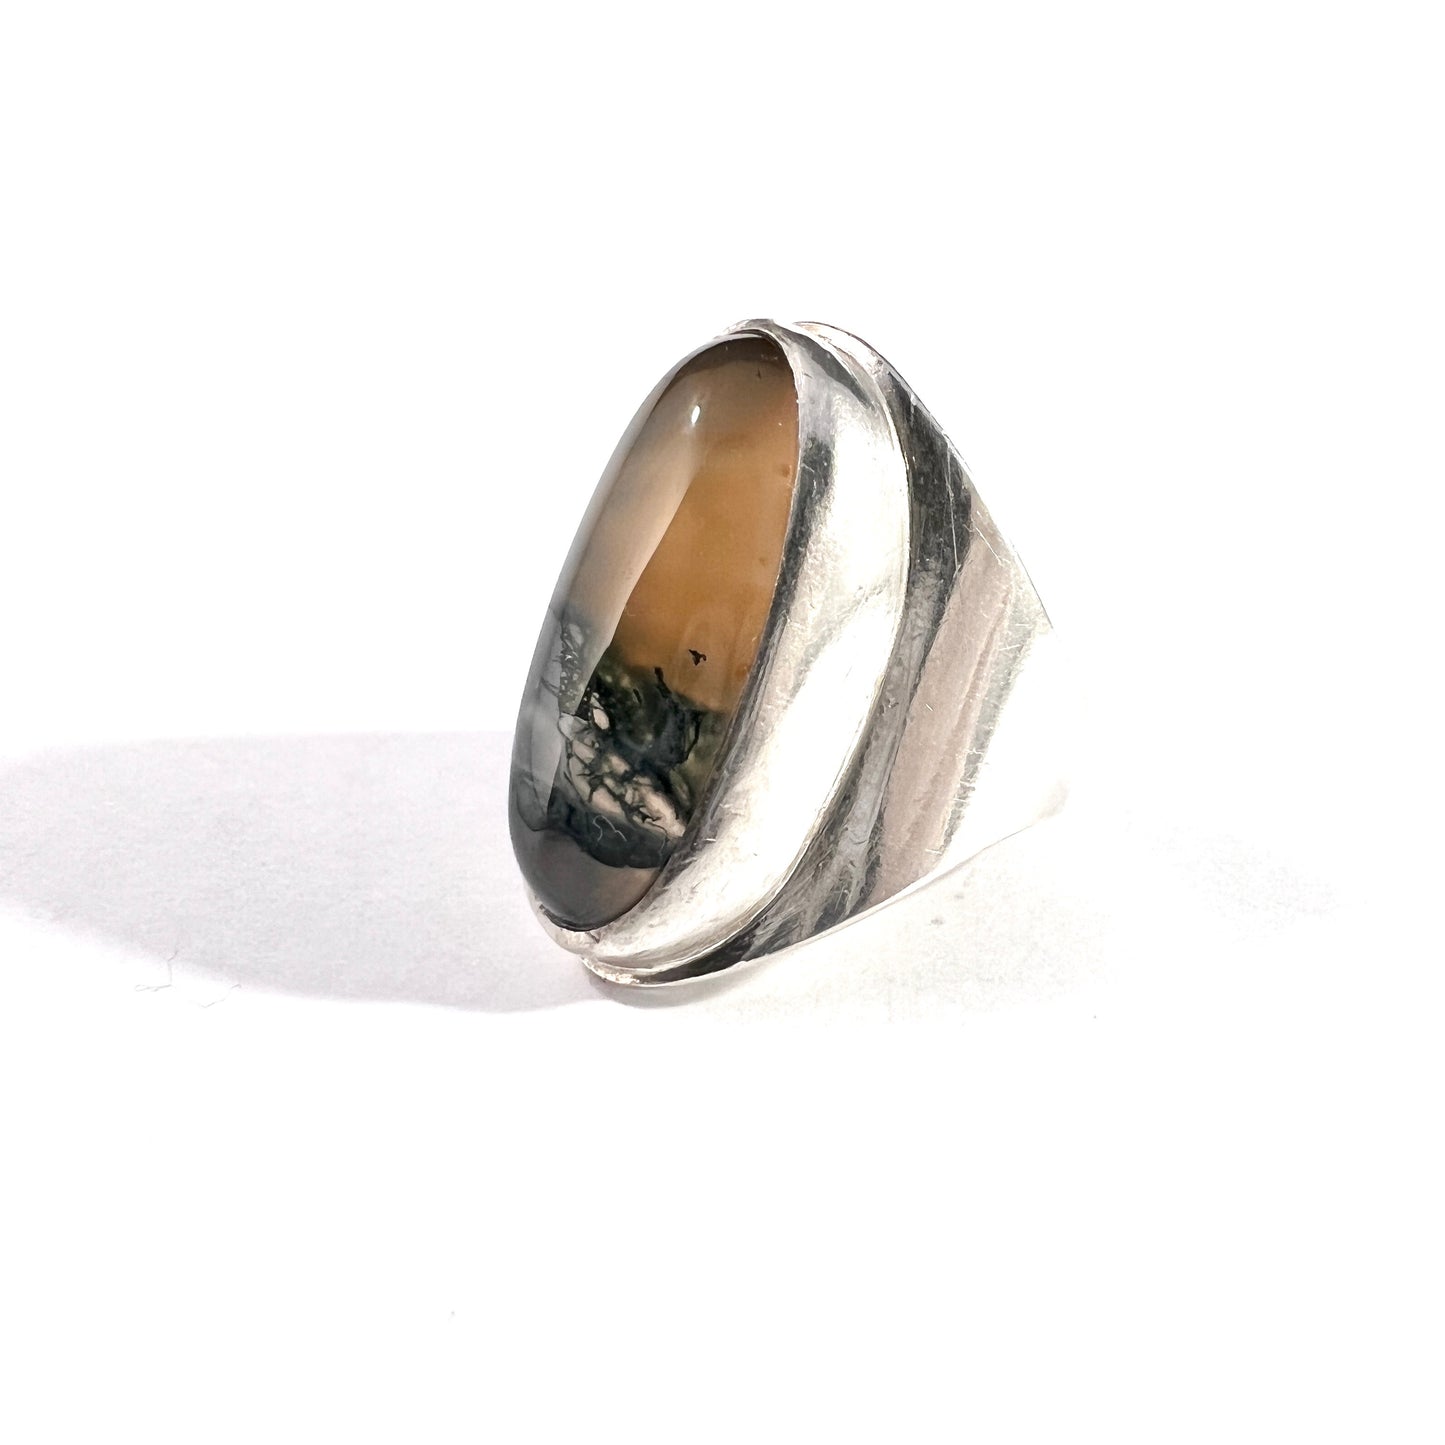 Germany c 1960s. Vintage 835 Silver Moss Agate Ring.